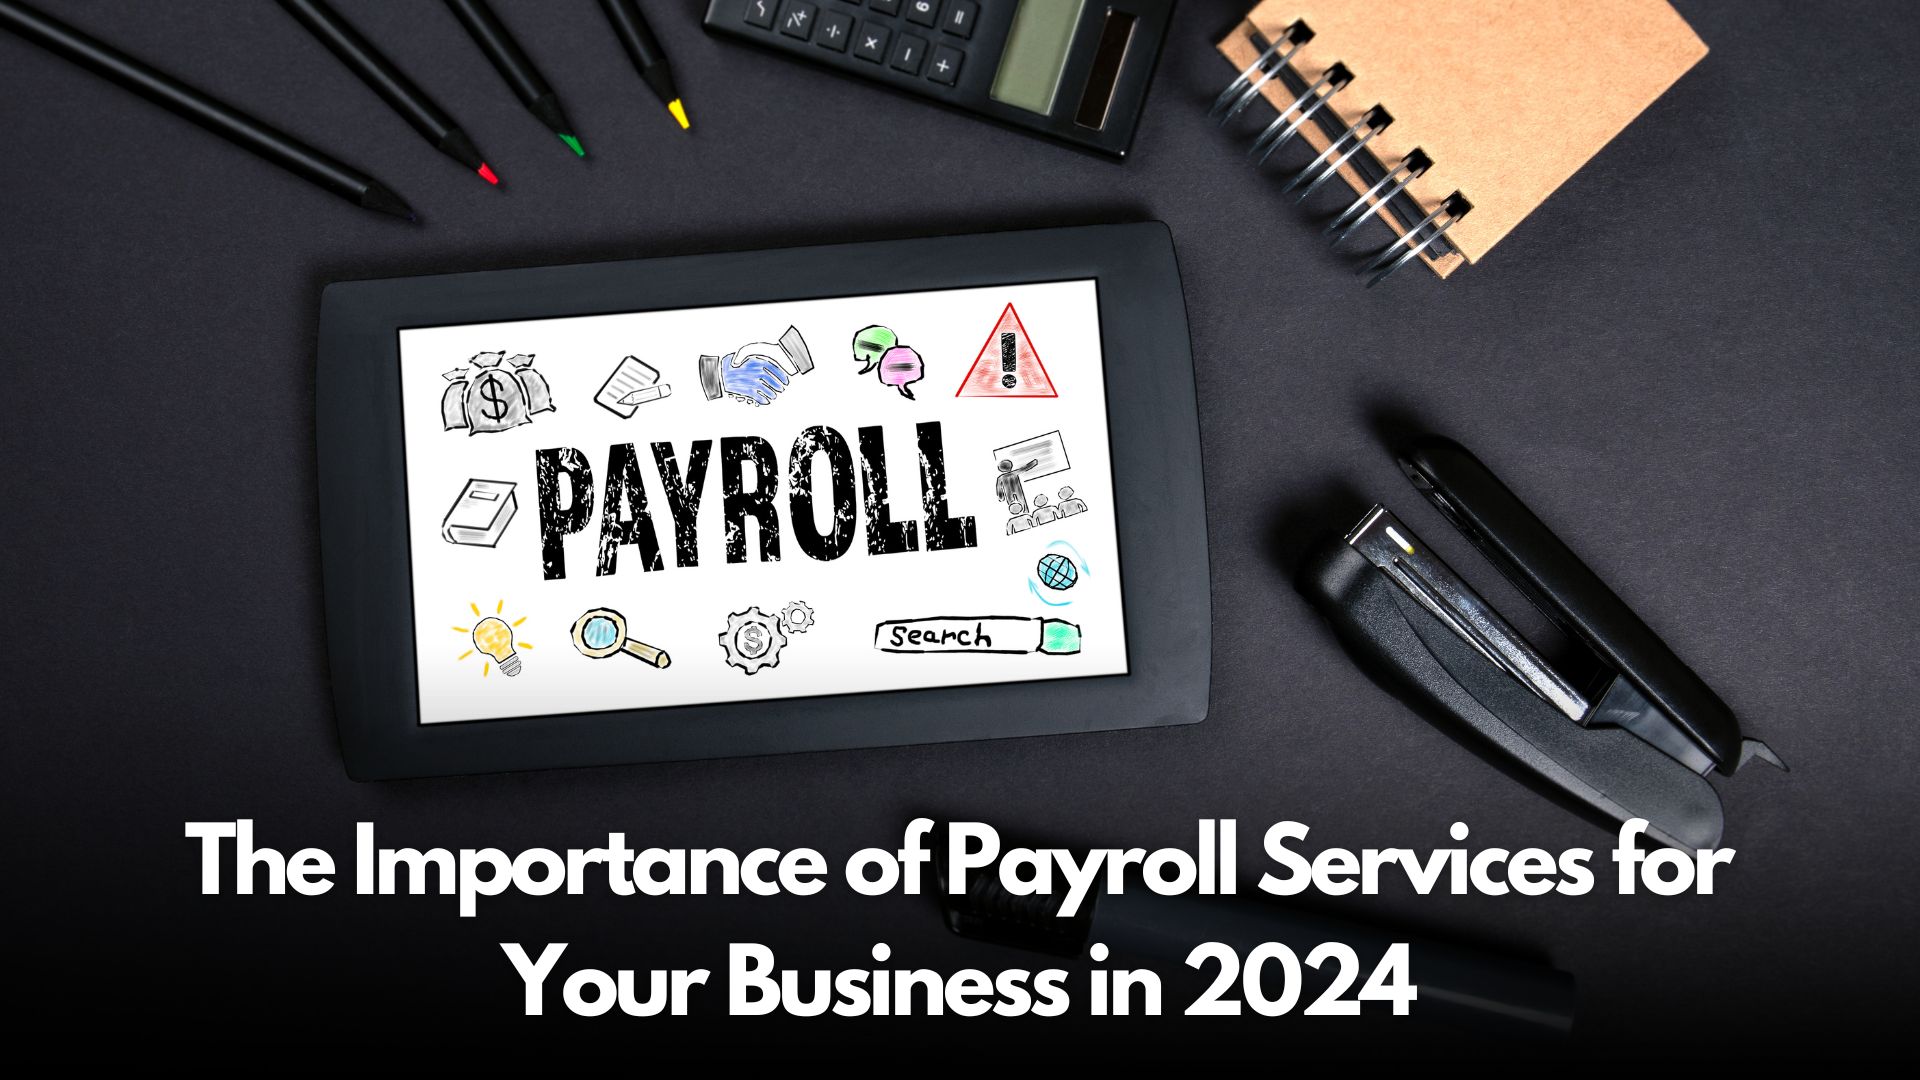 A serene business owner watches their employees work productively, confident their payroll is handled accurately and efficiently by a reliable service.